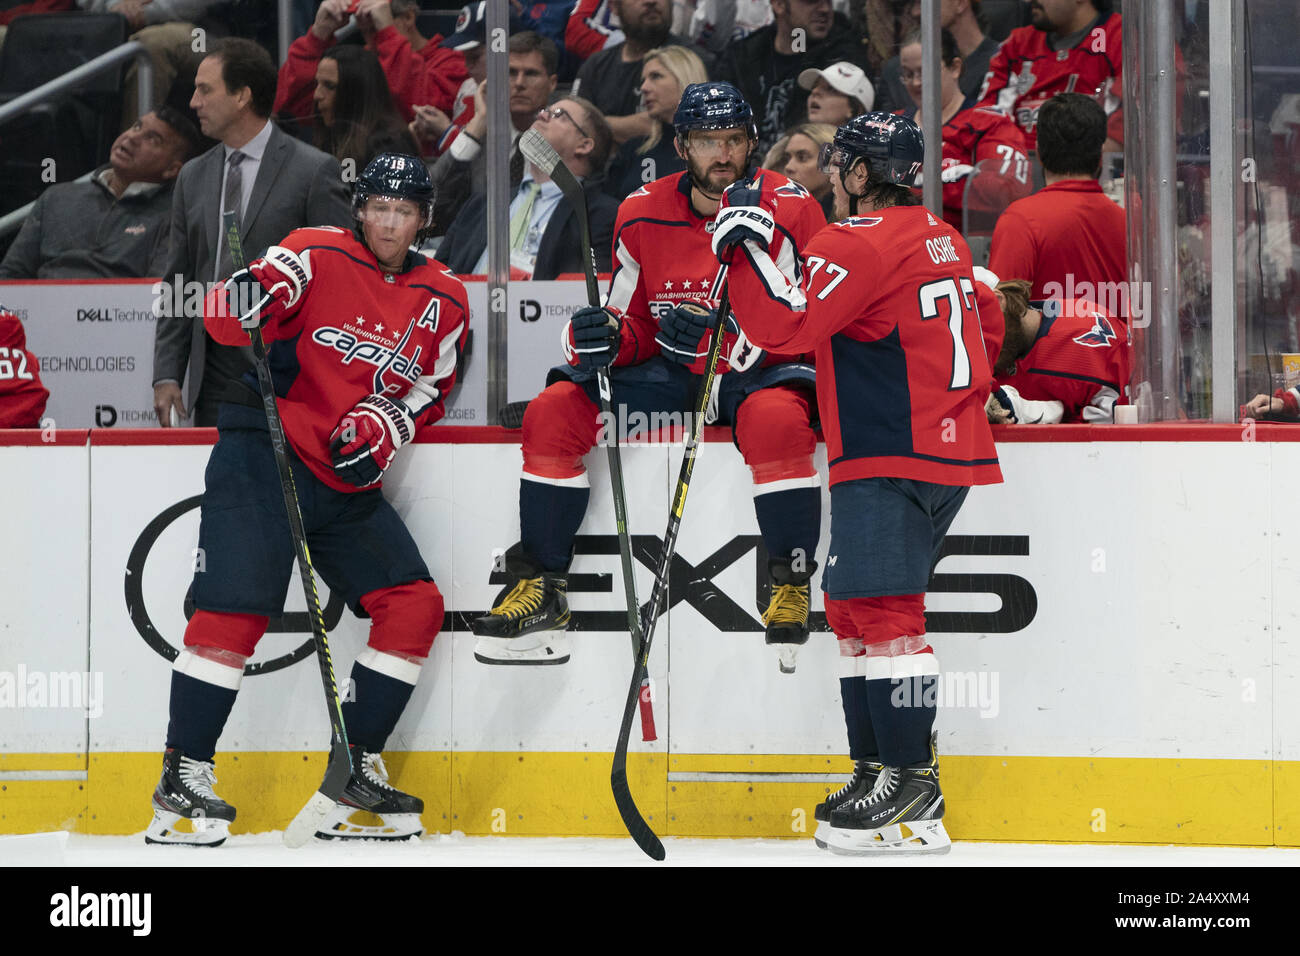 Washington, United States. 16th Oct, 2019. Washington Capitals players from left to right center Nicklas Backstrom (19), left wing Alex Ovechkin (8), and right wing T.J. Oshie (77), talk after a stoppage in play during the third period as the Caps play the Toronto Maple Leafs at Capital One Arena in Washington, DC on Wednesday, October 16, 2019. The Capitals host the Toronto Maple Leafs to start a 3 game home stand tonight. Photo by Alex Edelman/UPI Credit: UPI/Alamy Live News Stock Photo